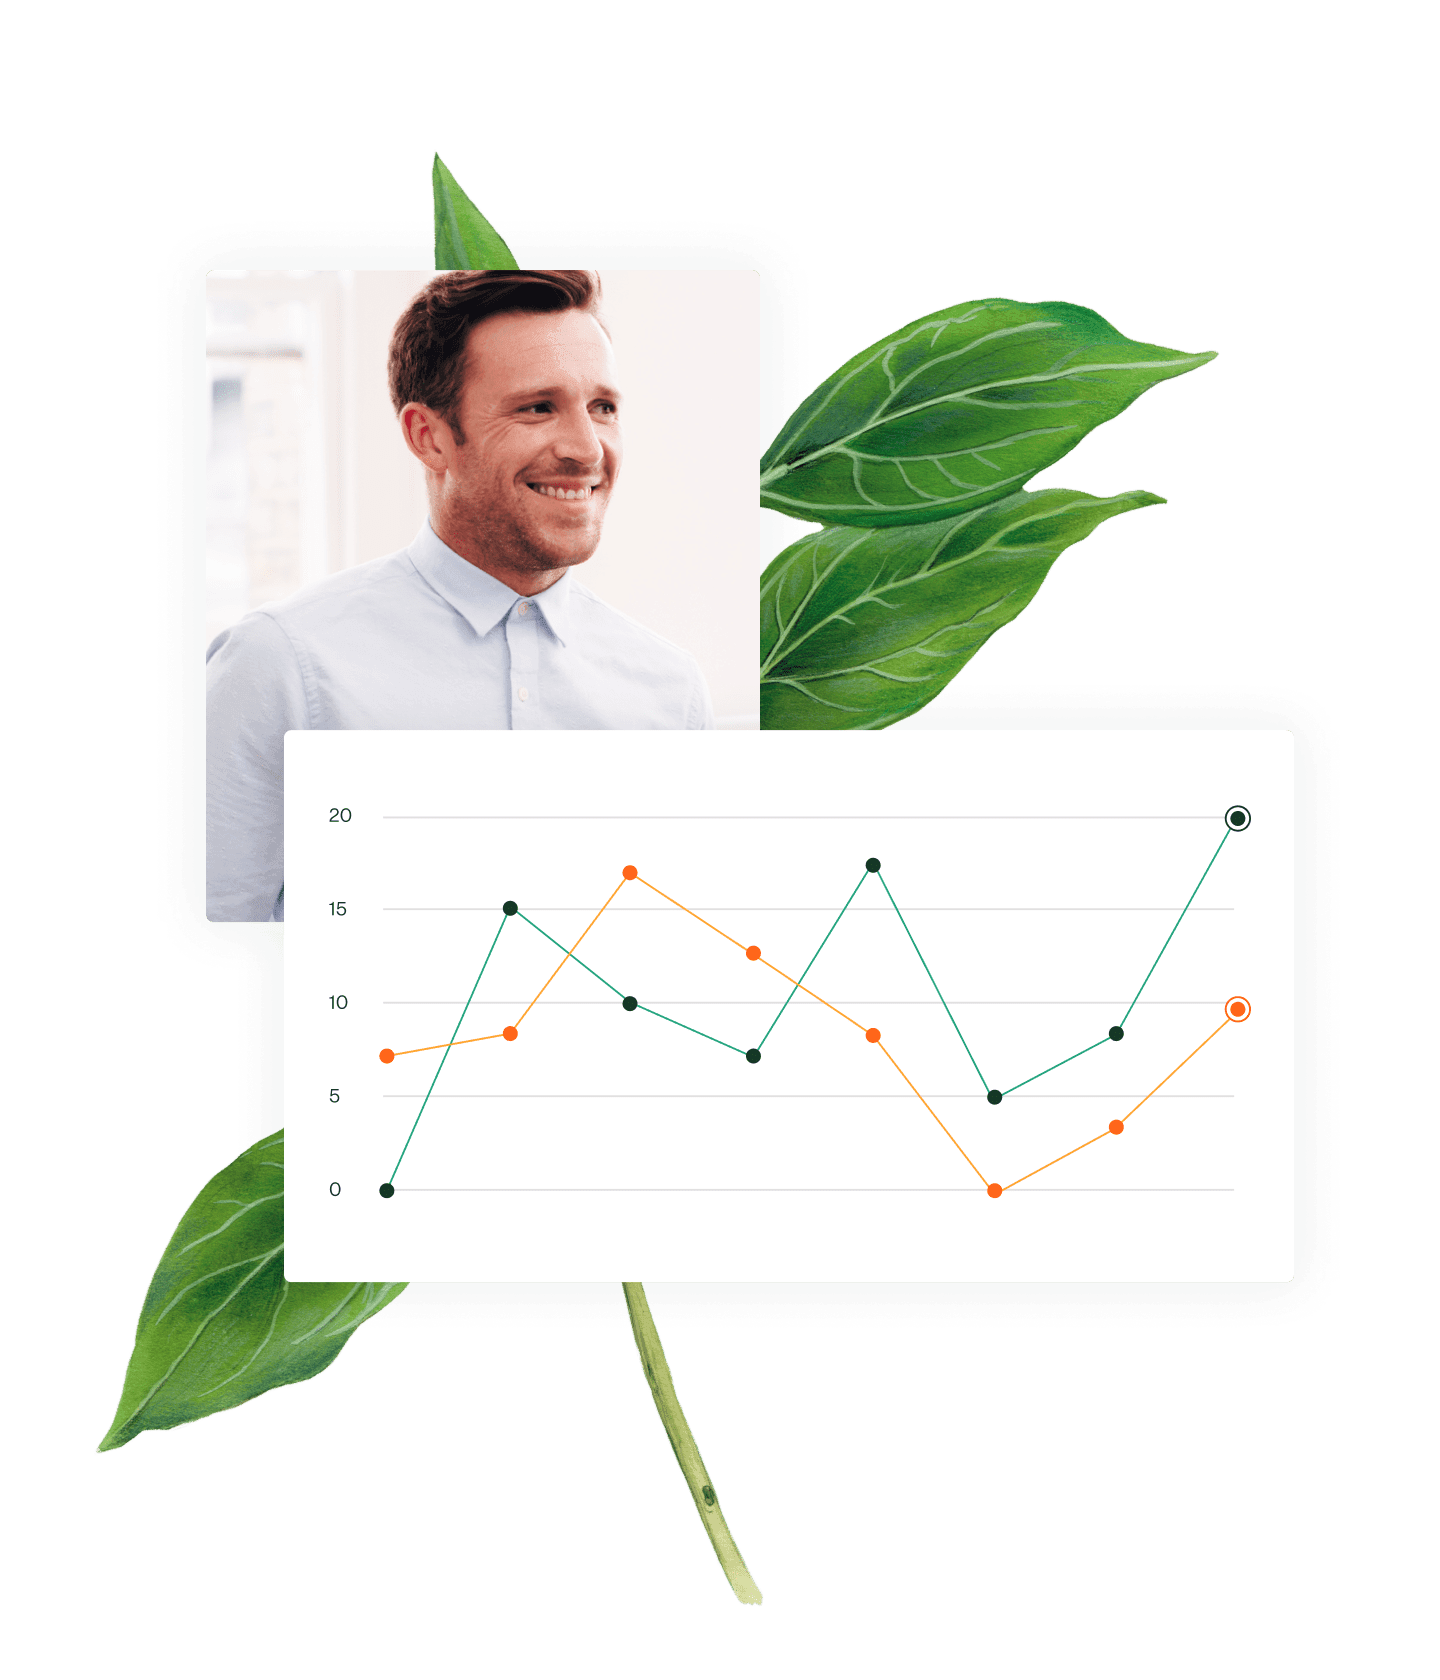 Photo of man and image of line graph